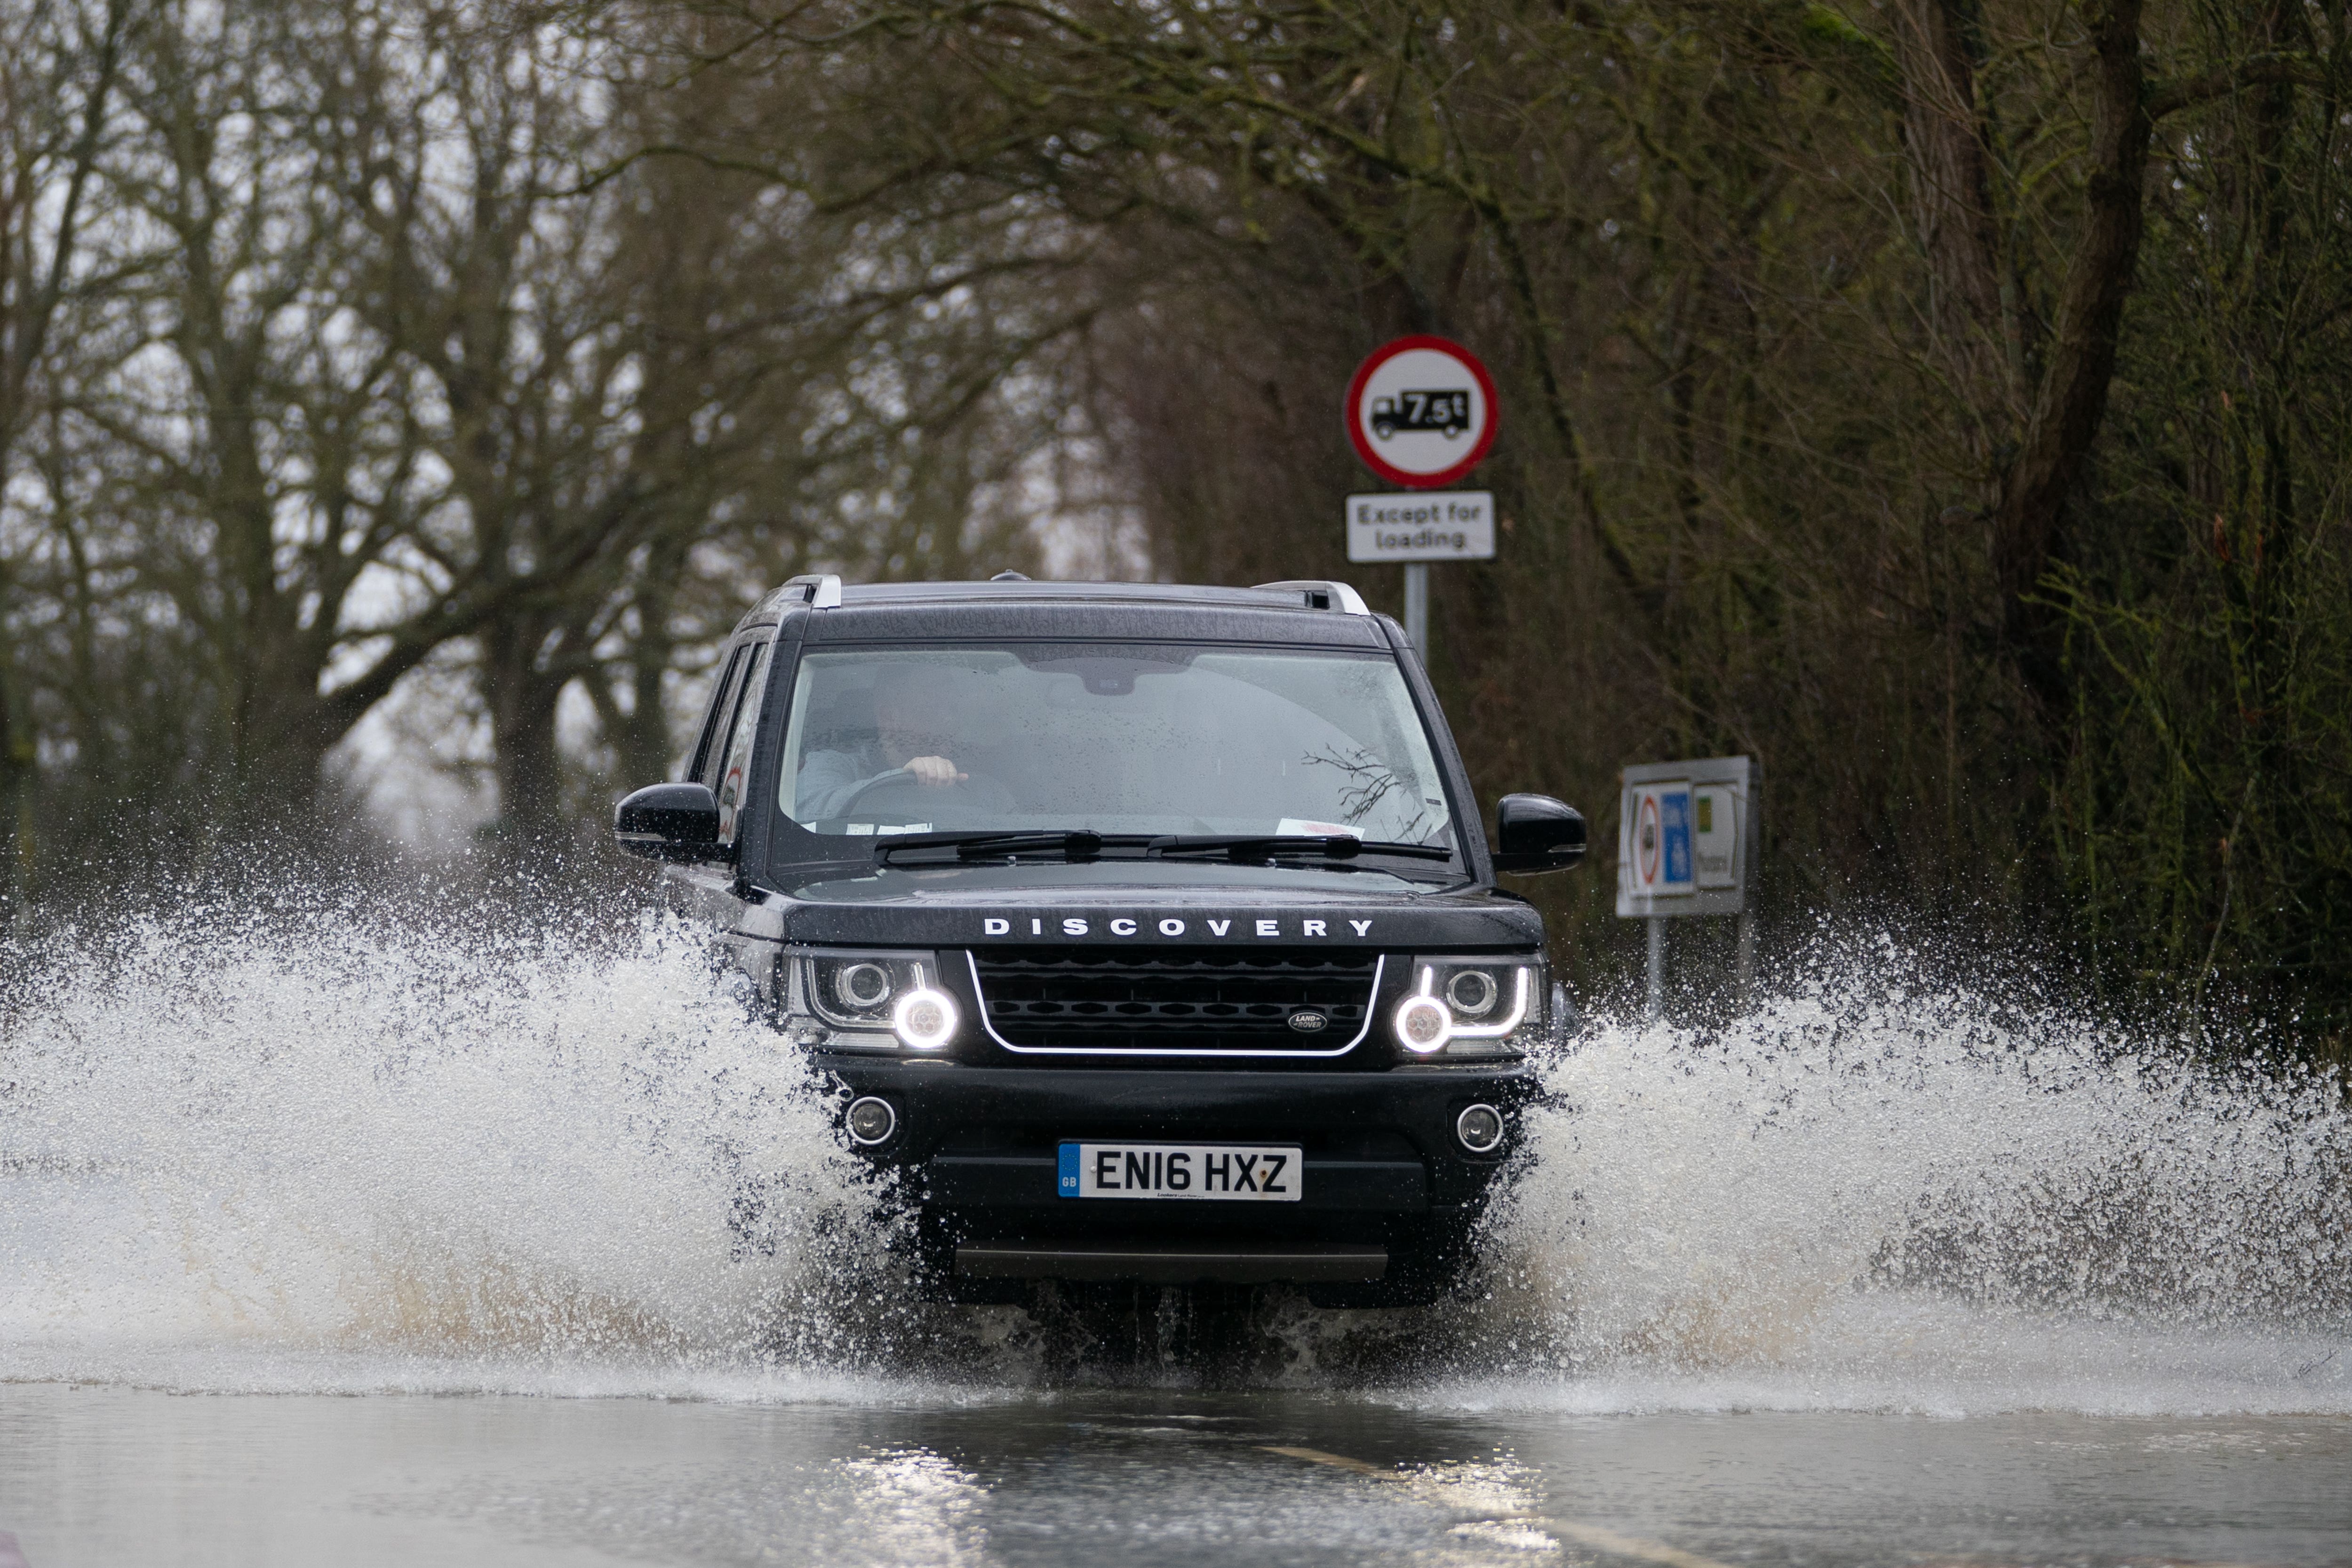 More than one in six motorists admit they would not change their driving plans despite a red weather warning, a new survey suggests (Joe Giddens/PA)